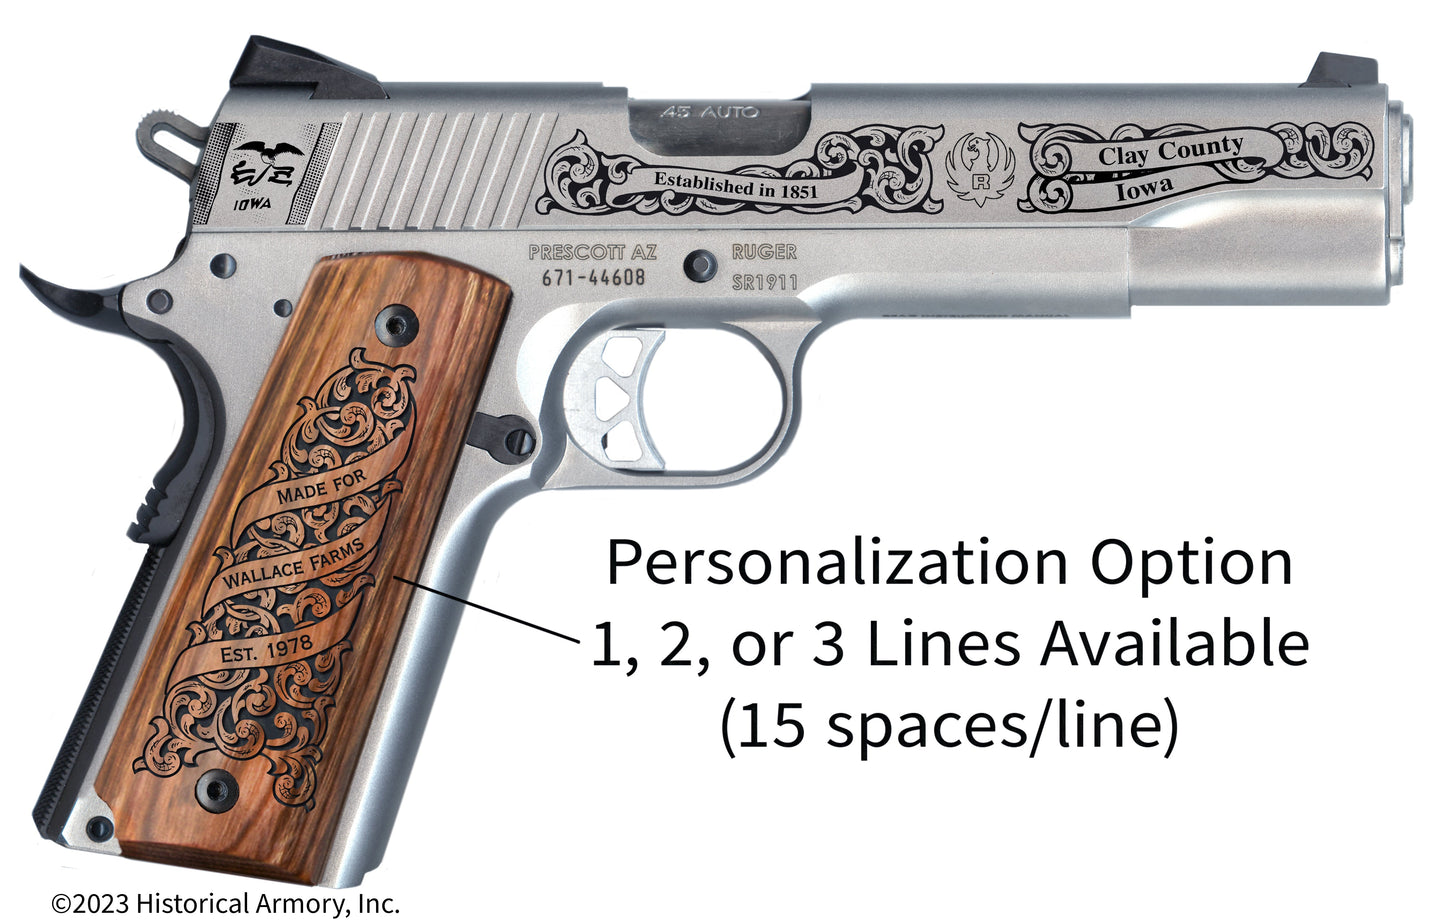 Clay County Iowa Personalized Engraved .45 Auto Ruger 1911